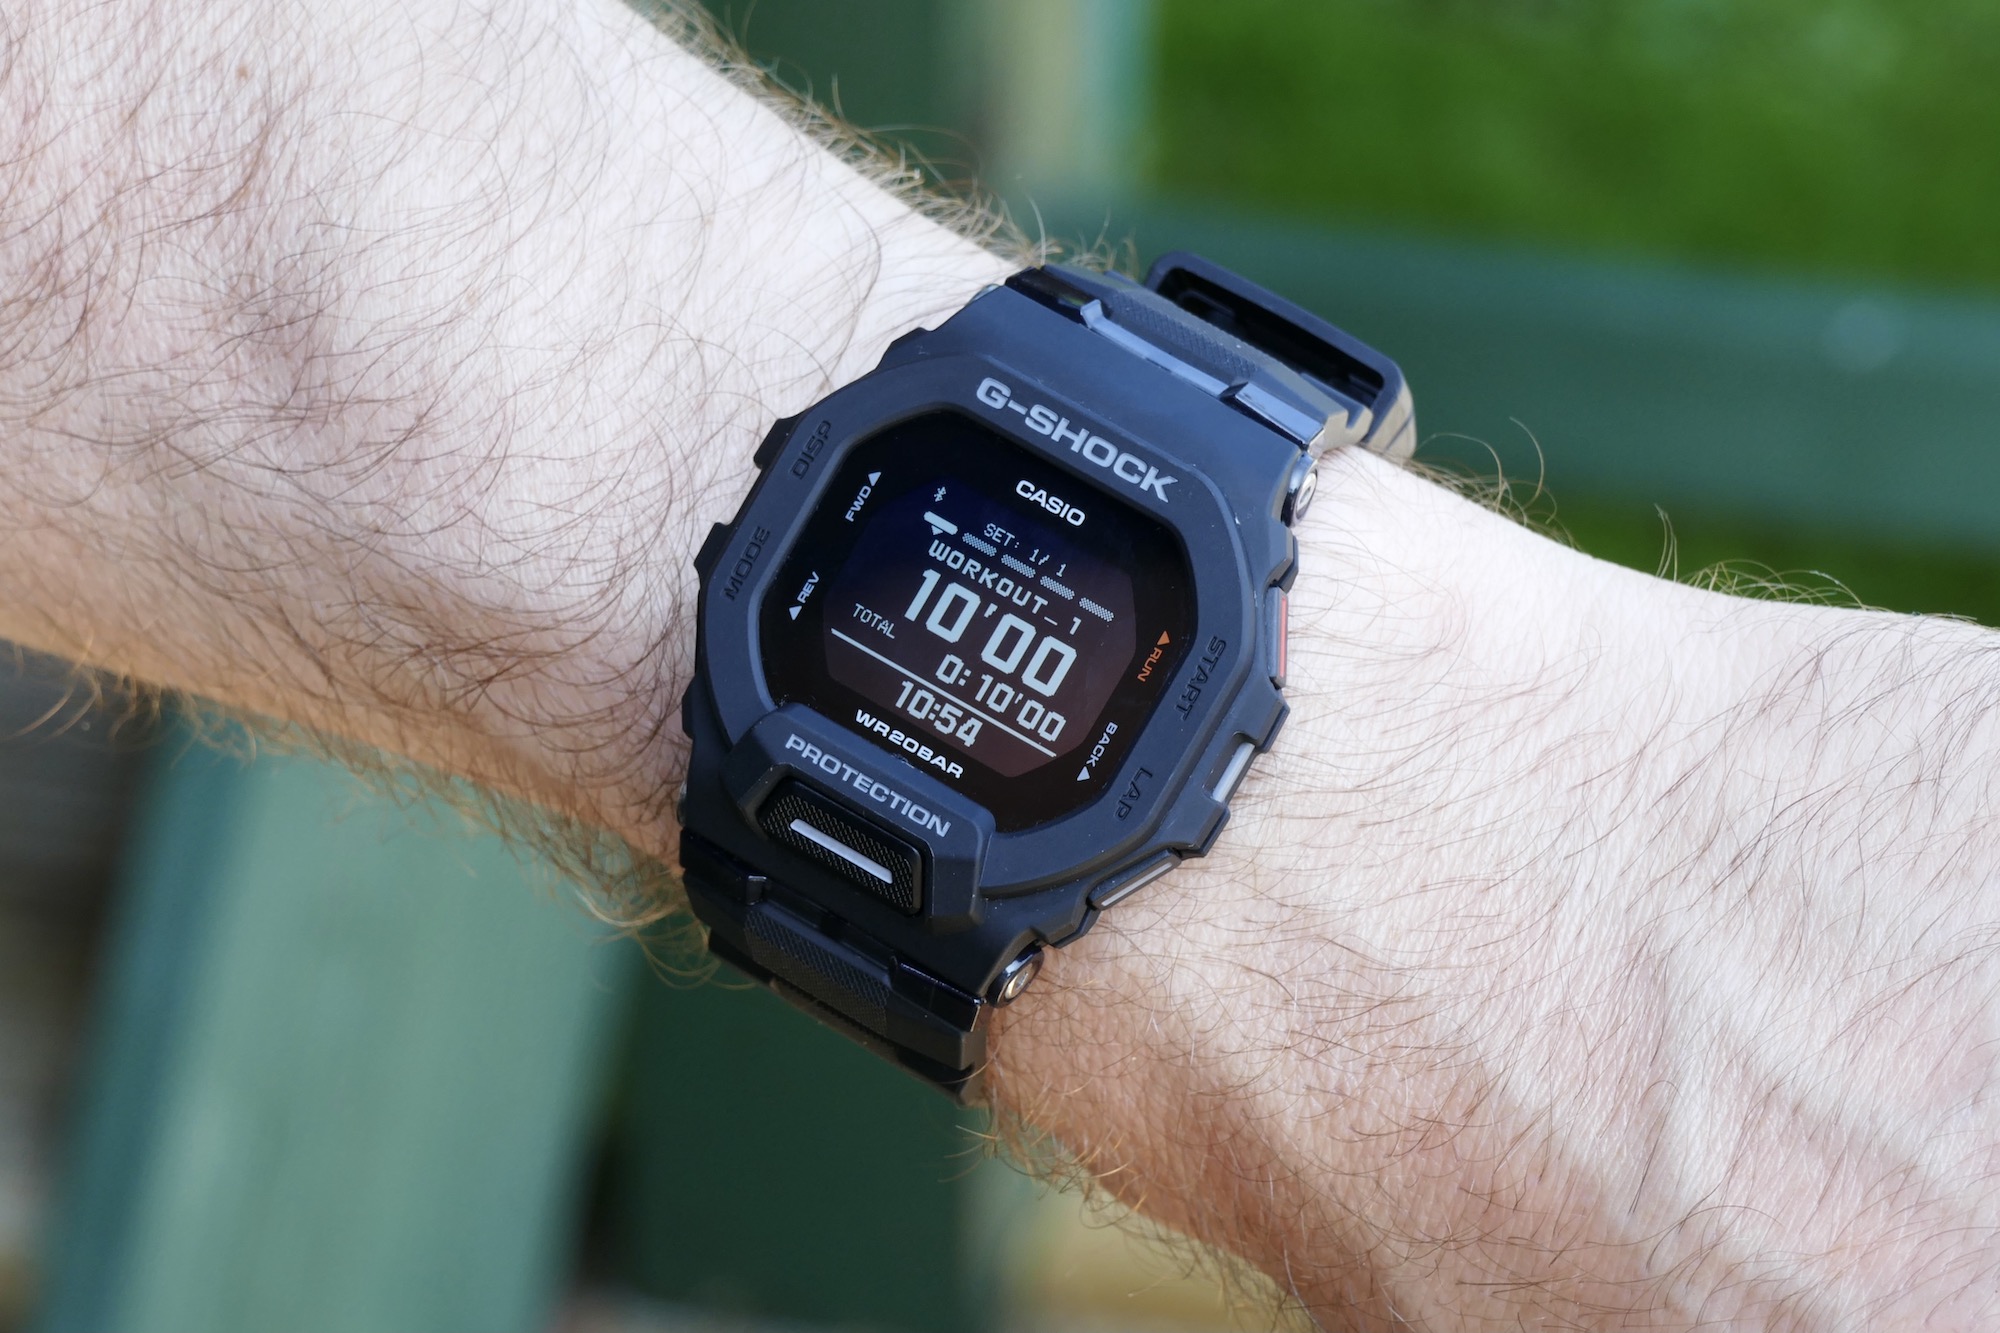 Interval workout screen on the Casio G-Shock GBD-200.